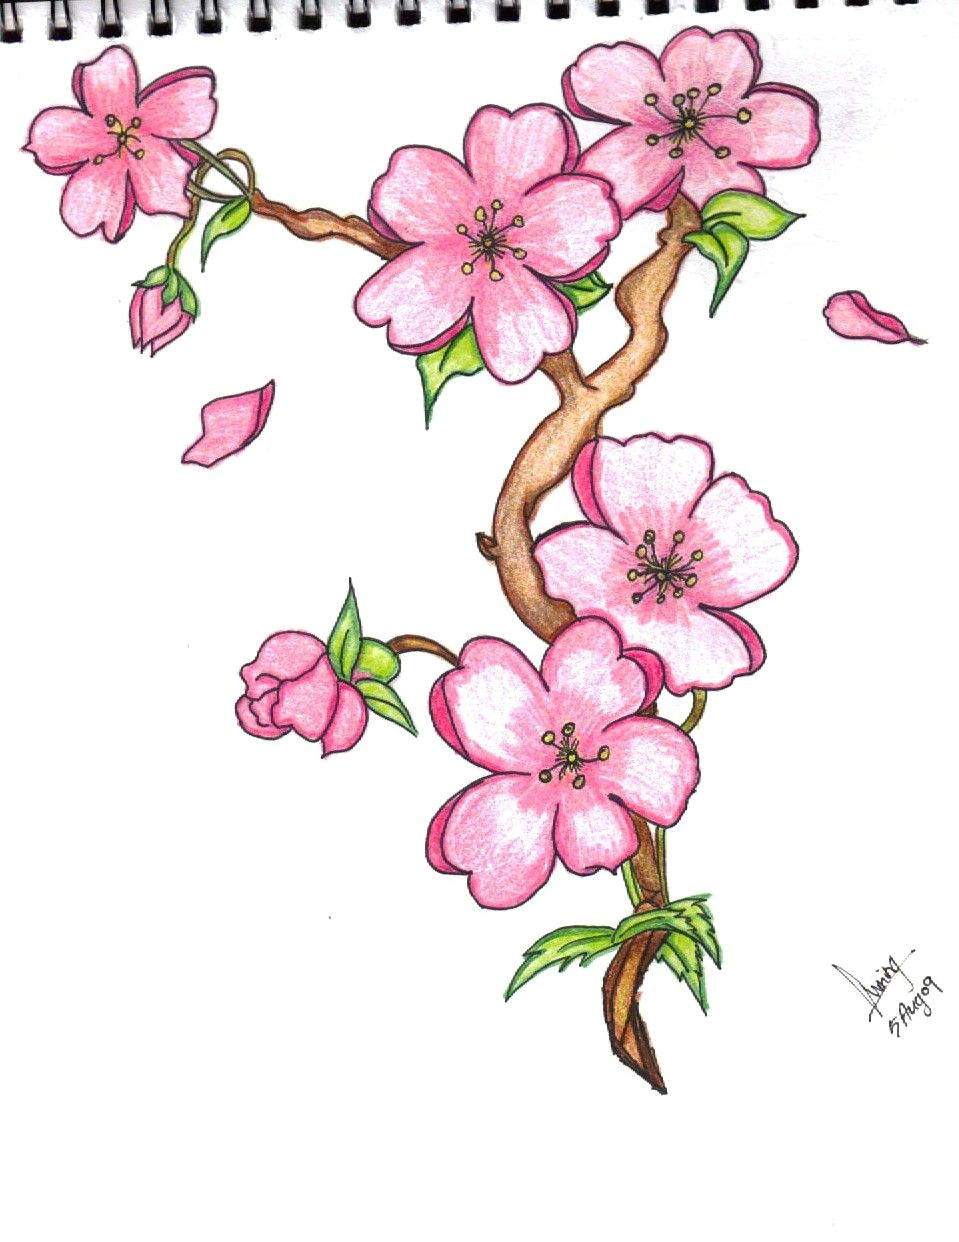 Easy Drawing Of Jasmine Flower Pin by Marvin todd On Drawing Flowers In 2019 Pinterest Drawings